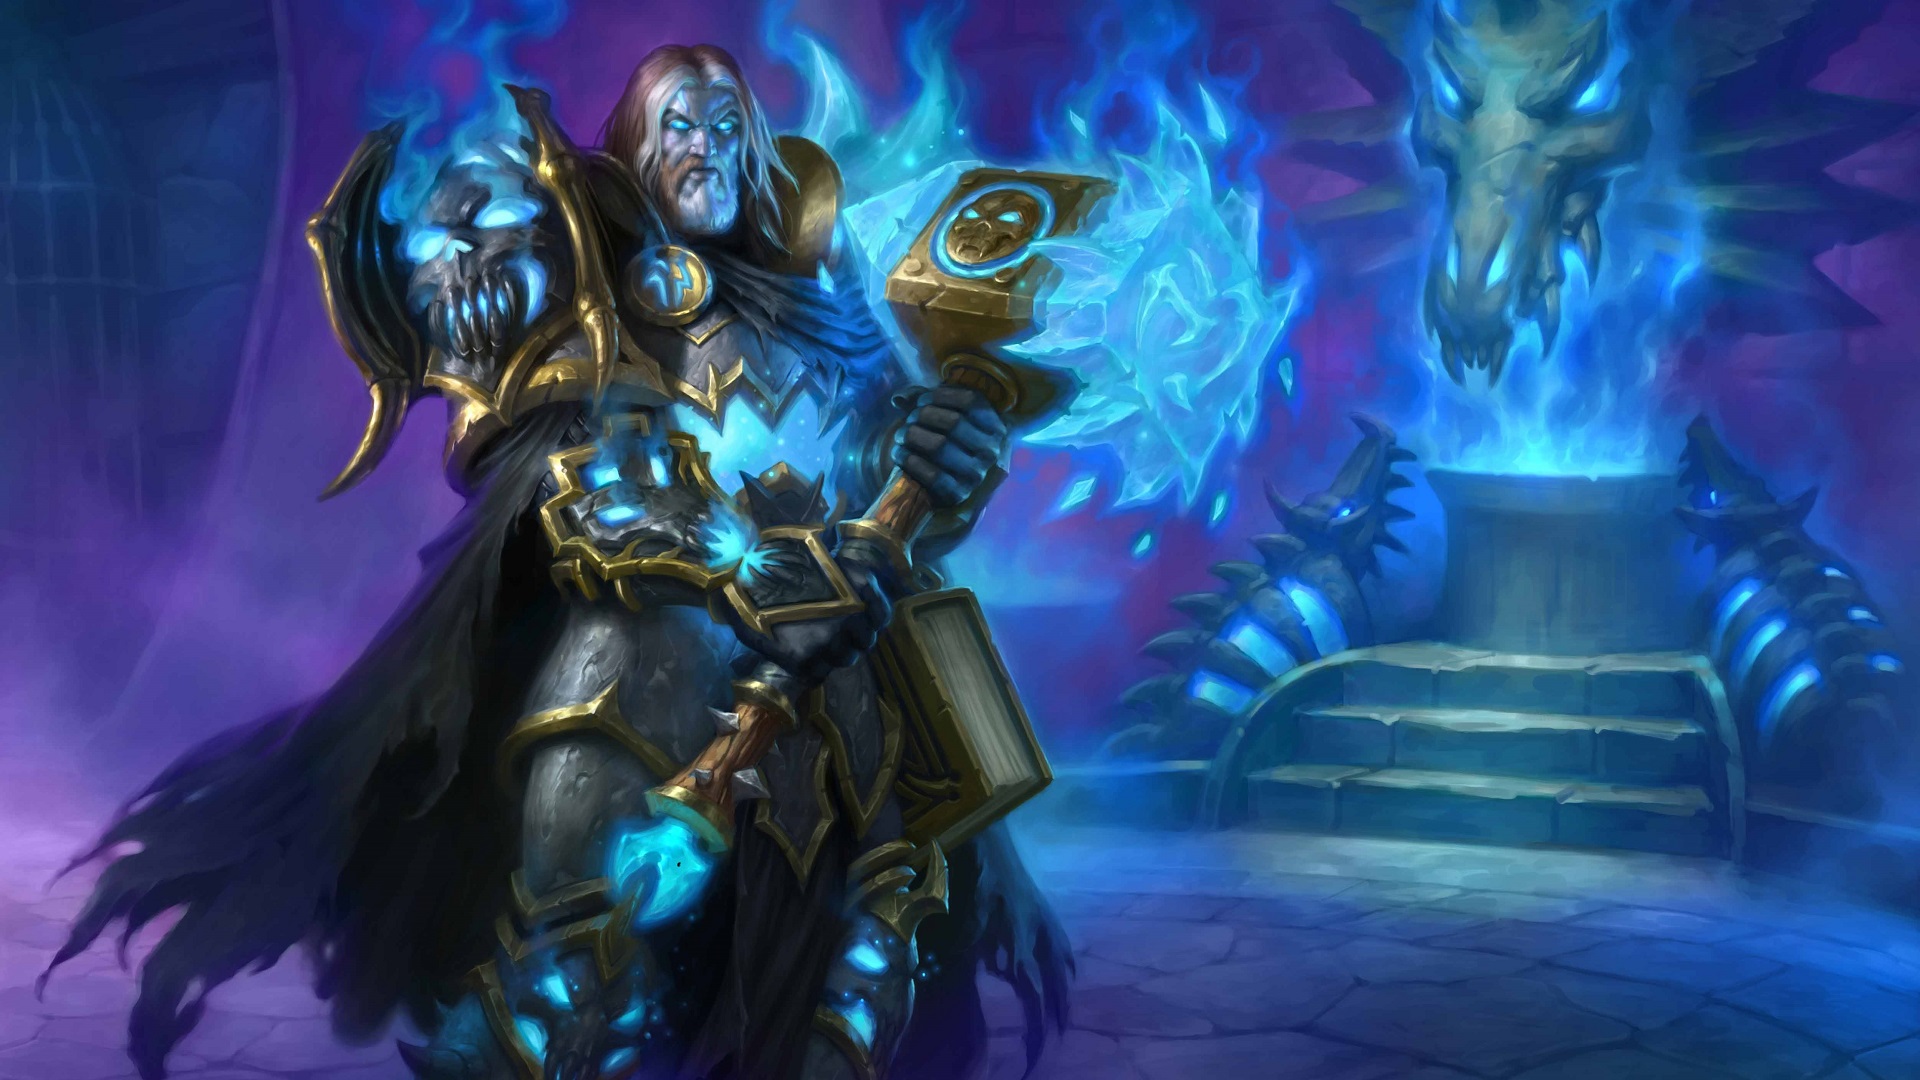 Uther the Lightbringer, Hearthstone: Heroes of Warcraft, Hearthstone, Warcraft, Cards, Artwork, Knights of the frozen throne, Death Knight, Video games Wallpaper HD / Desktop and Mobile Background